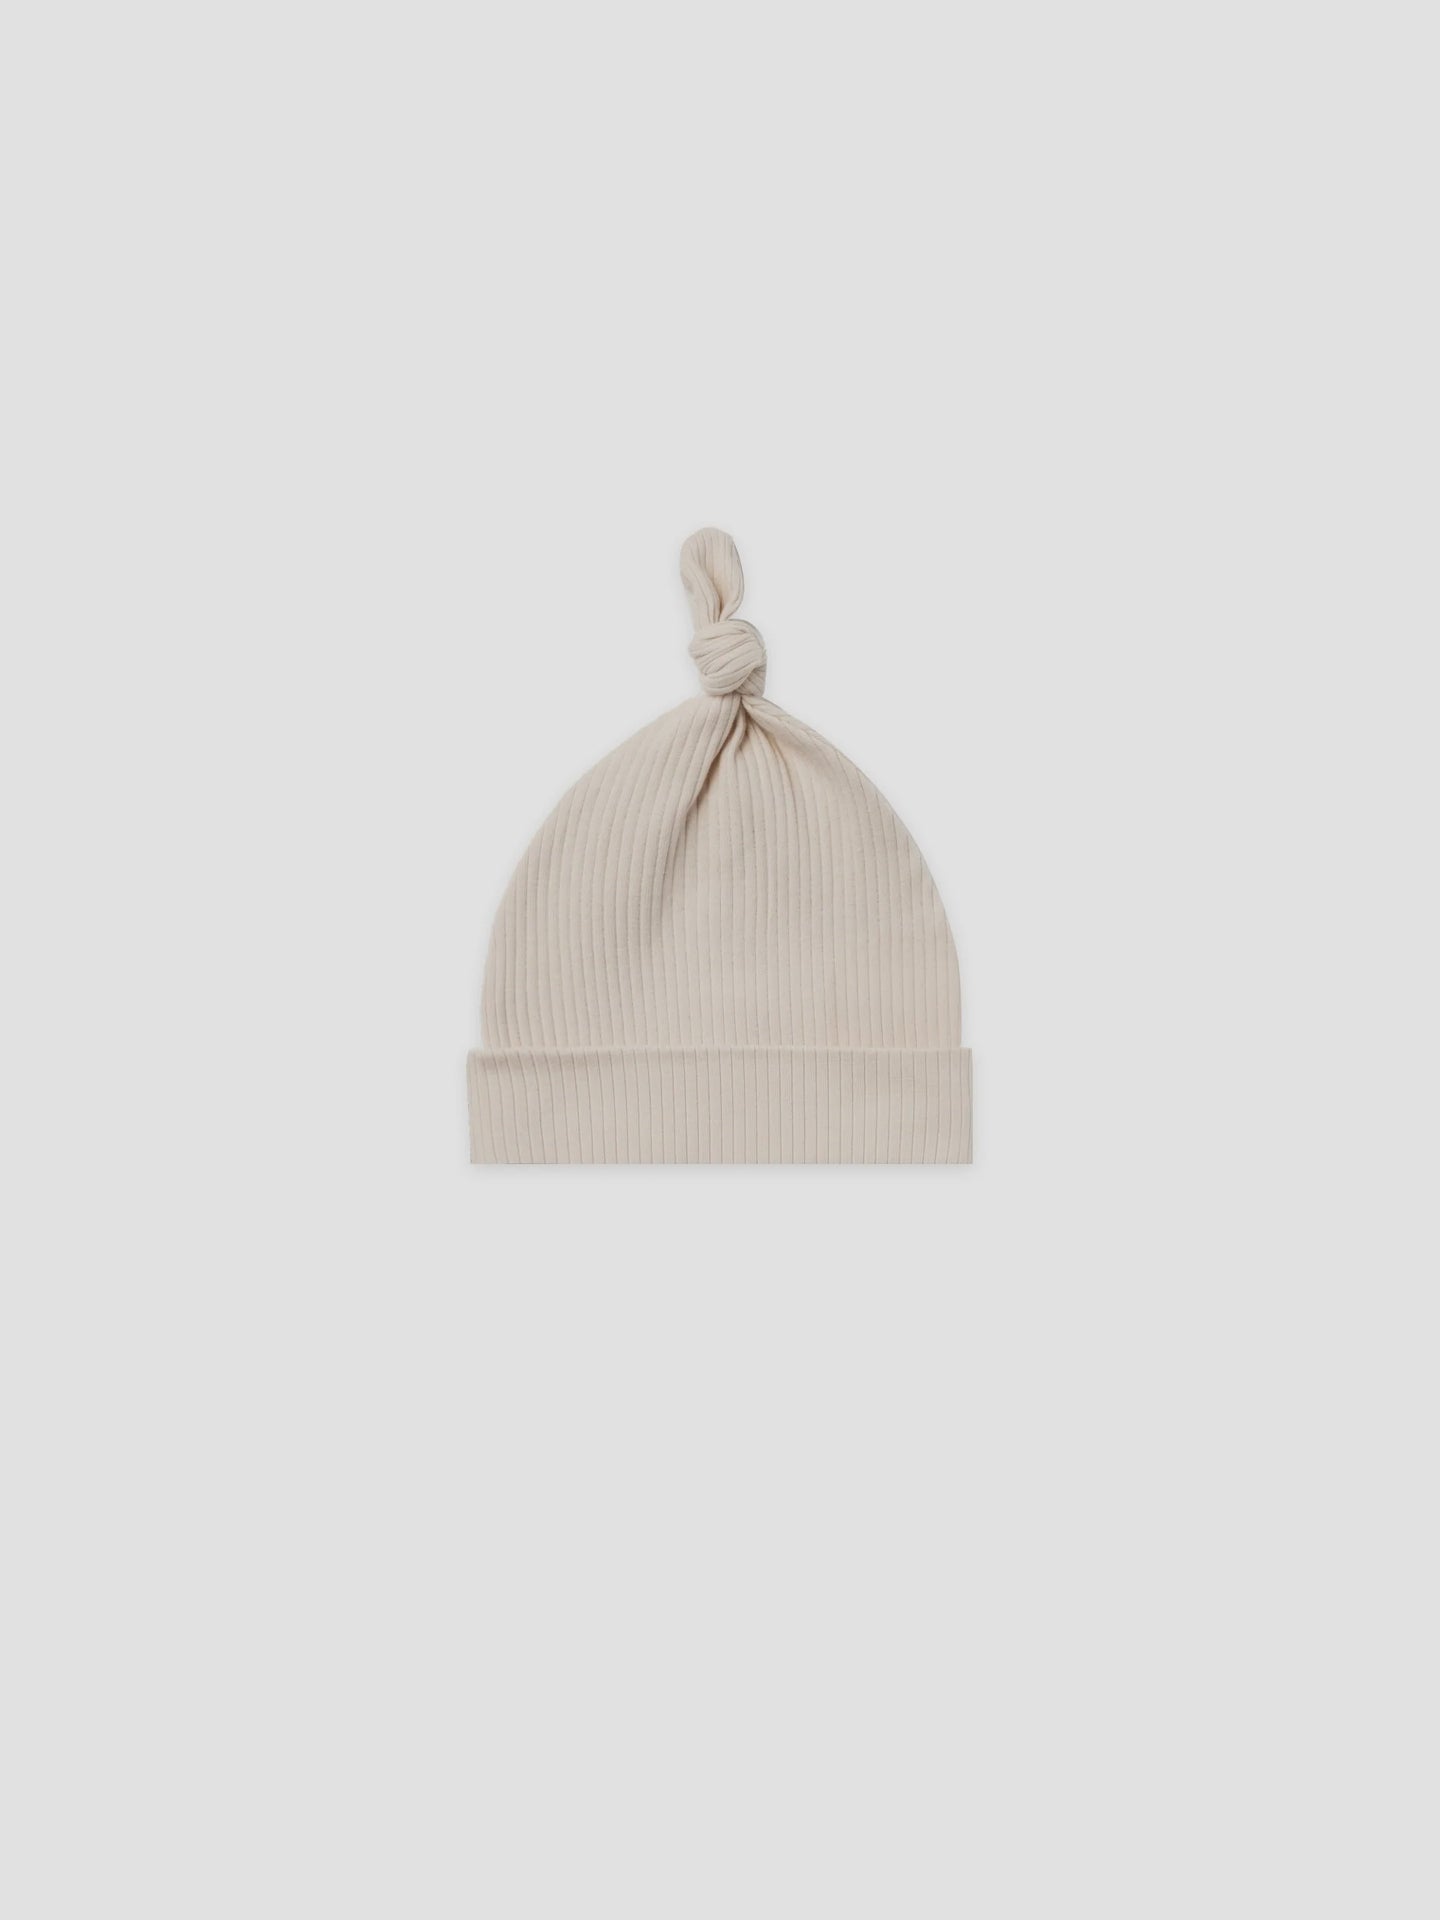 Quincy Mae - Organic Ribbed Knotted Baby Hat - Natural